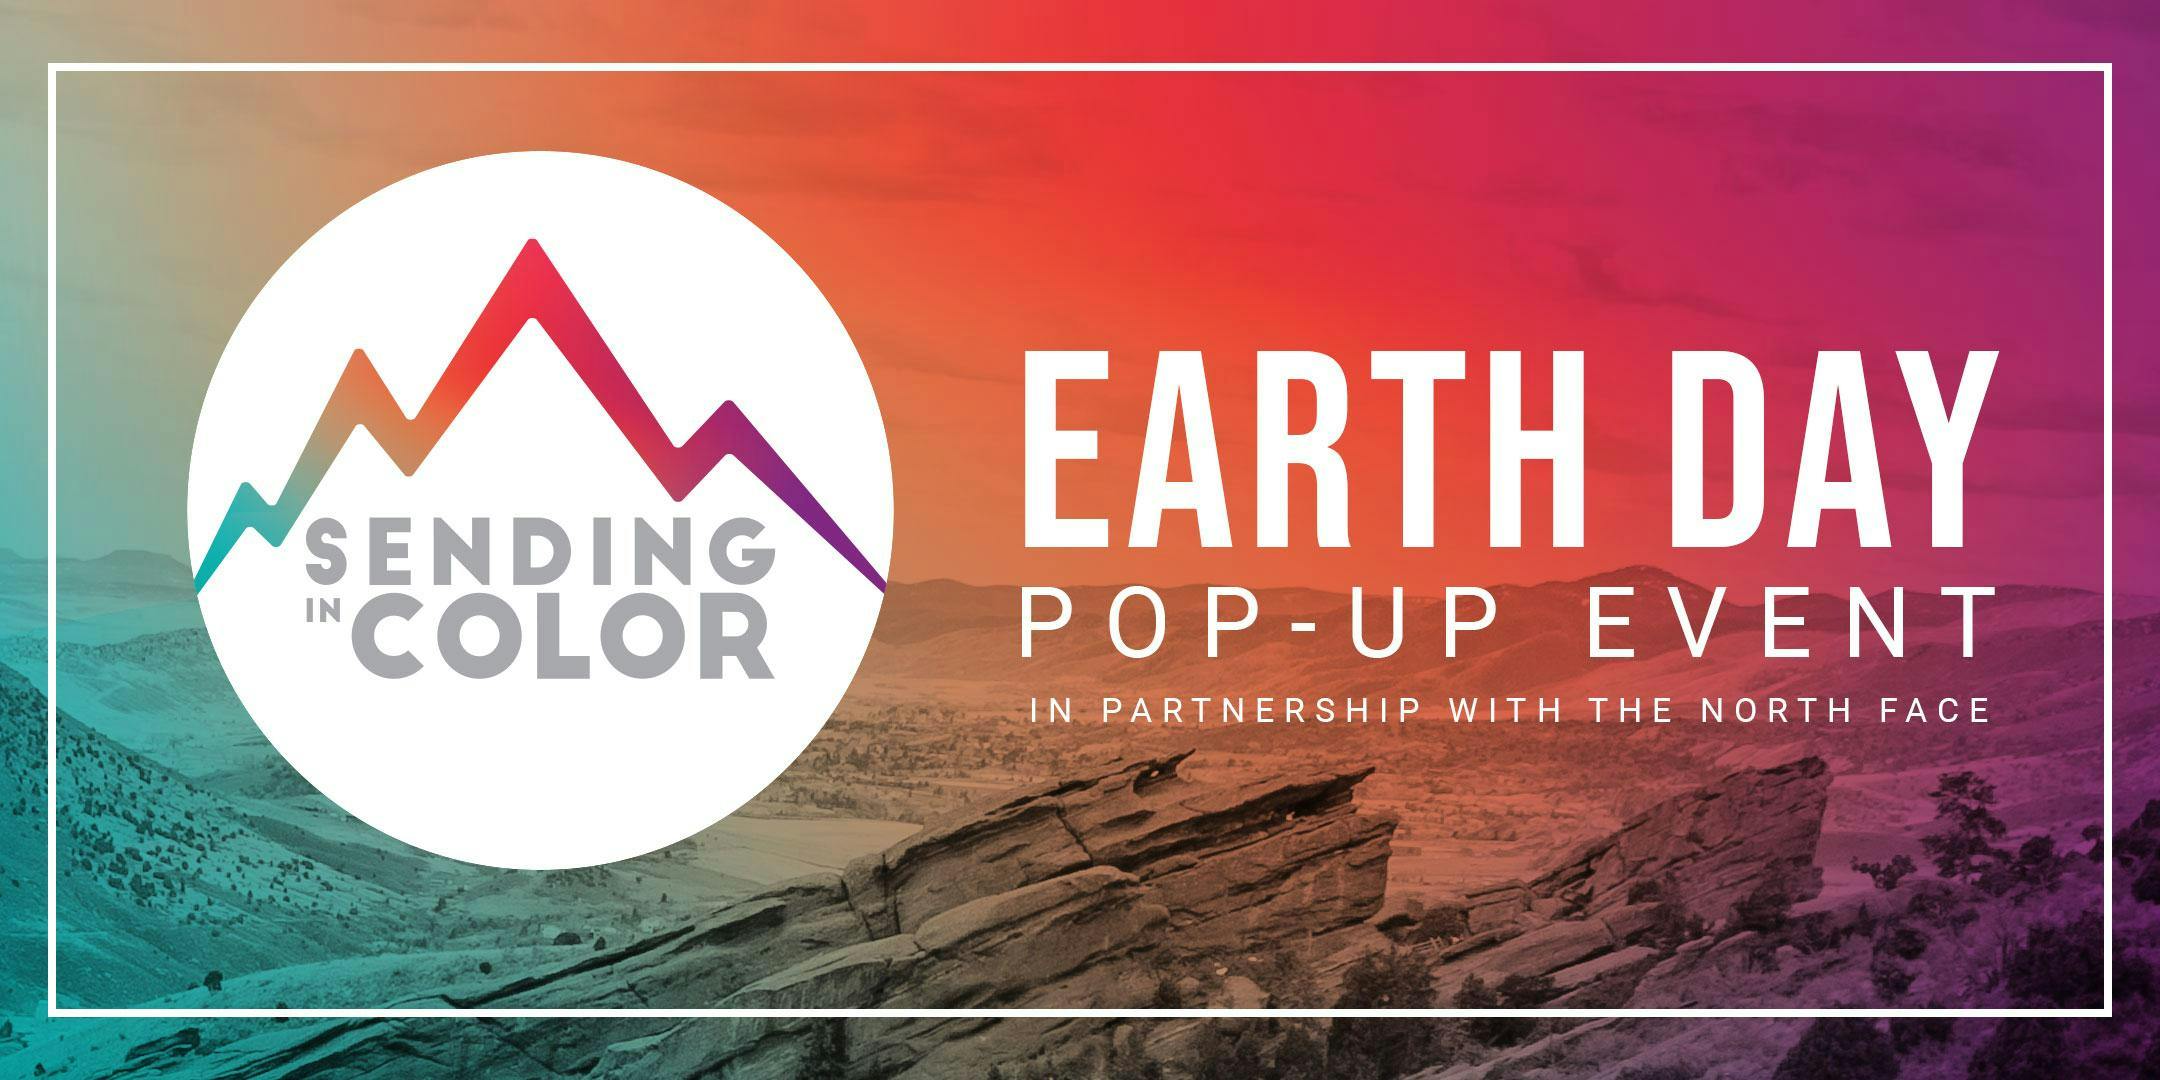 EARTH DAY POP-UP EVENT | By Sending in Color and The North Face